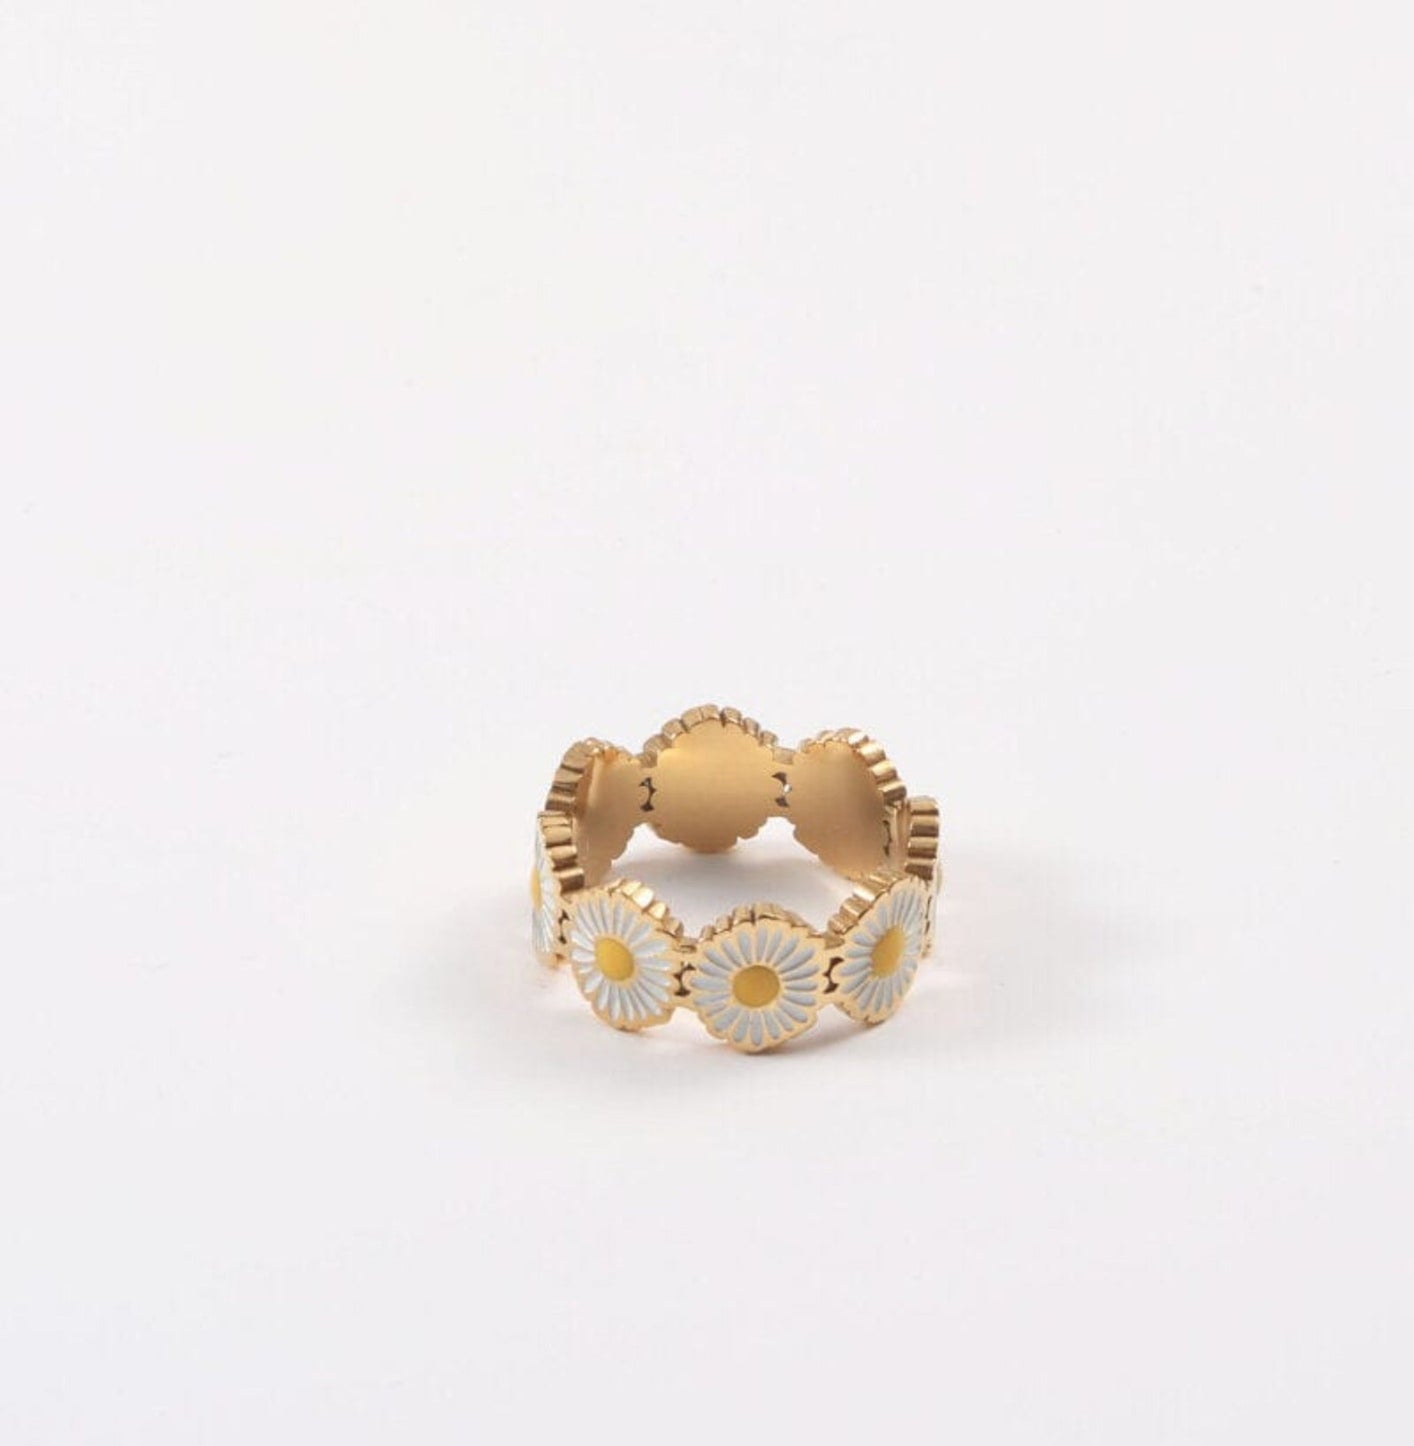 DAISY RING ring Yubama Jewelry Online Store - The Elegant Designs of Gold and Silver ! 